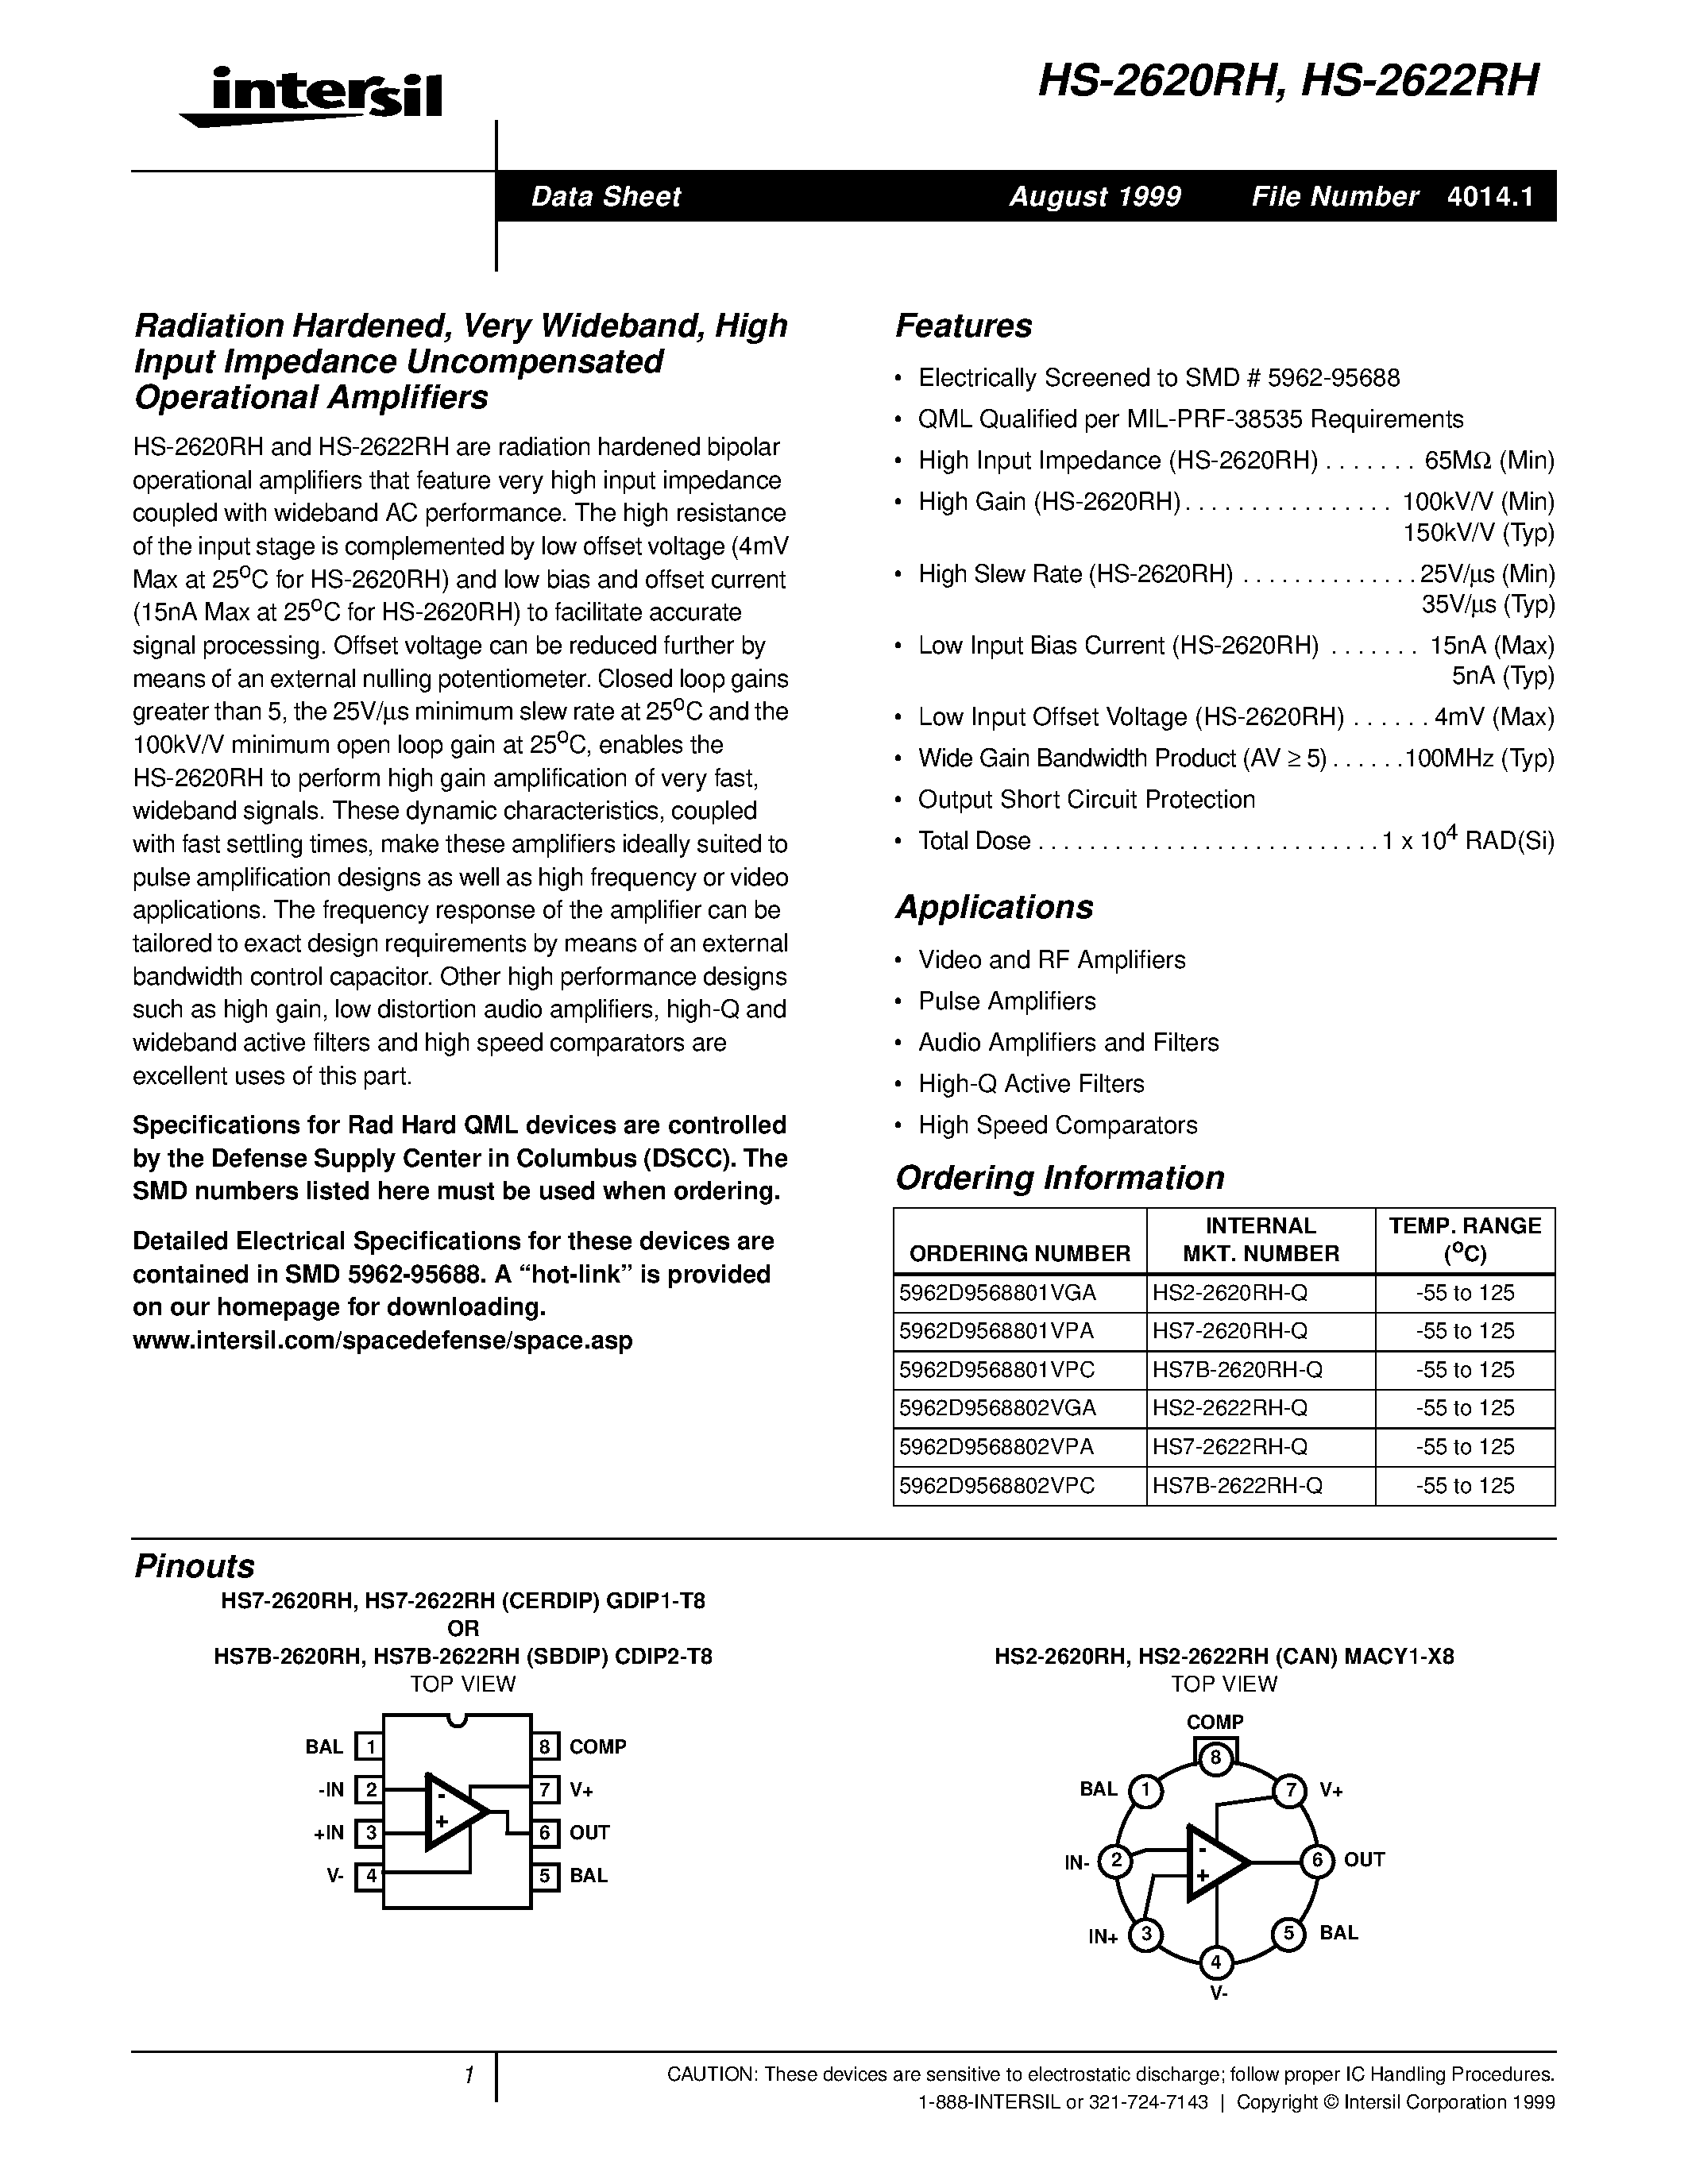 Datasheet HS7B-2622RH-Q - Radiation Hardened/ Very Wideband/ High Input Impedance Uncompensated Operational Amplifiers page 1